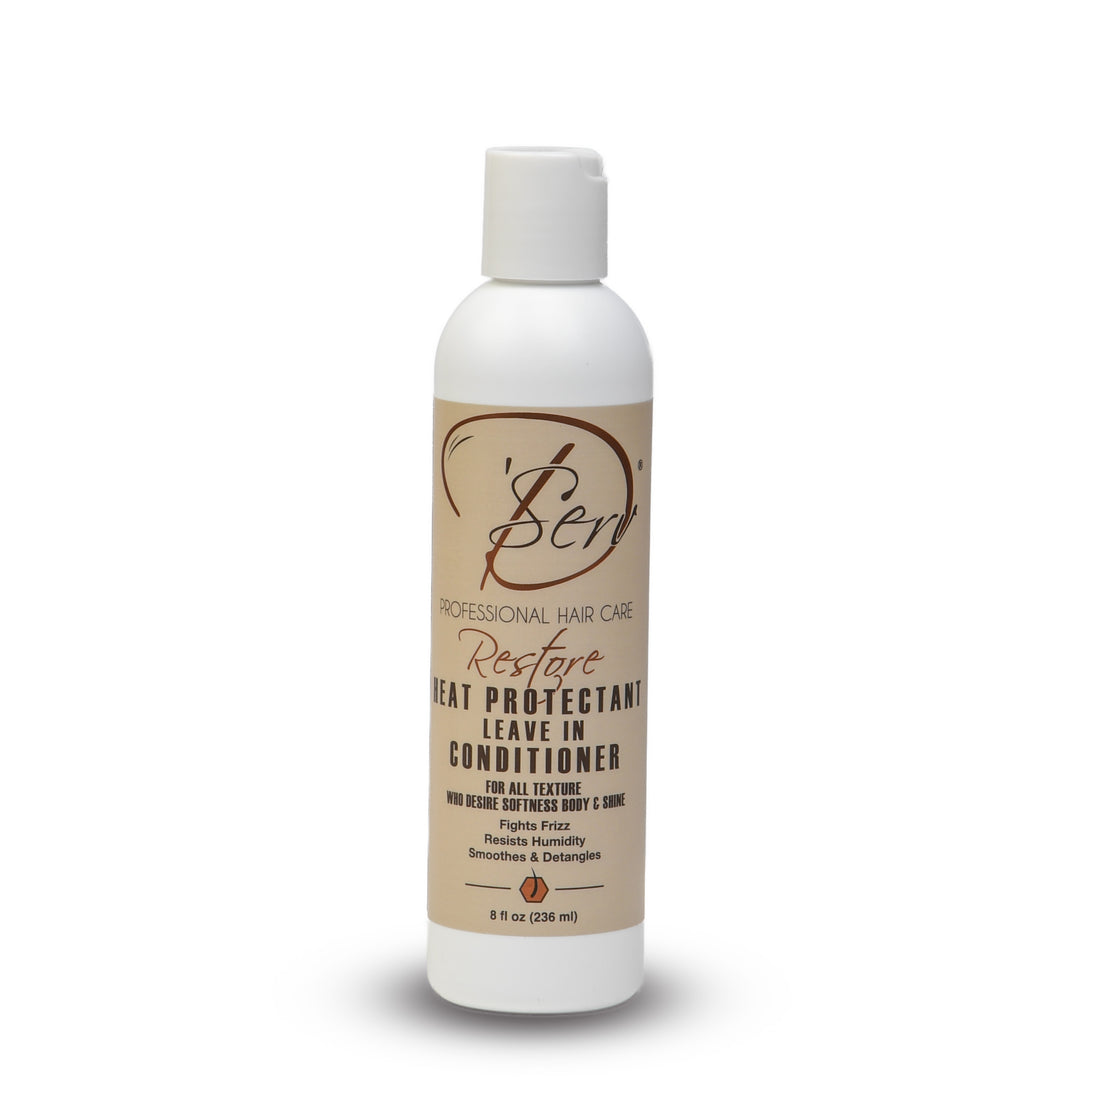 Restore Heat Protectant Leave-in Conditioner (NEW!)